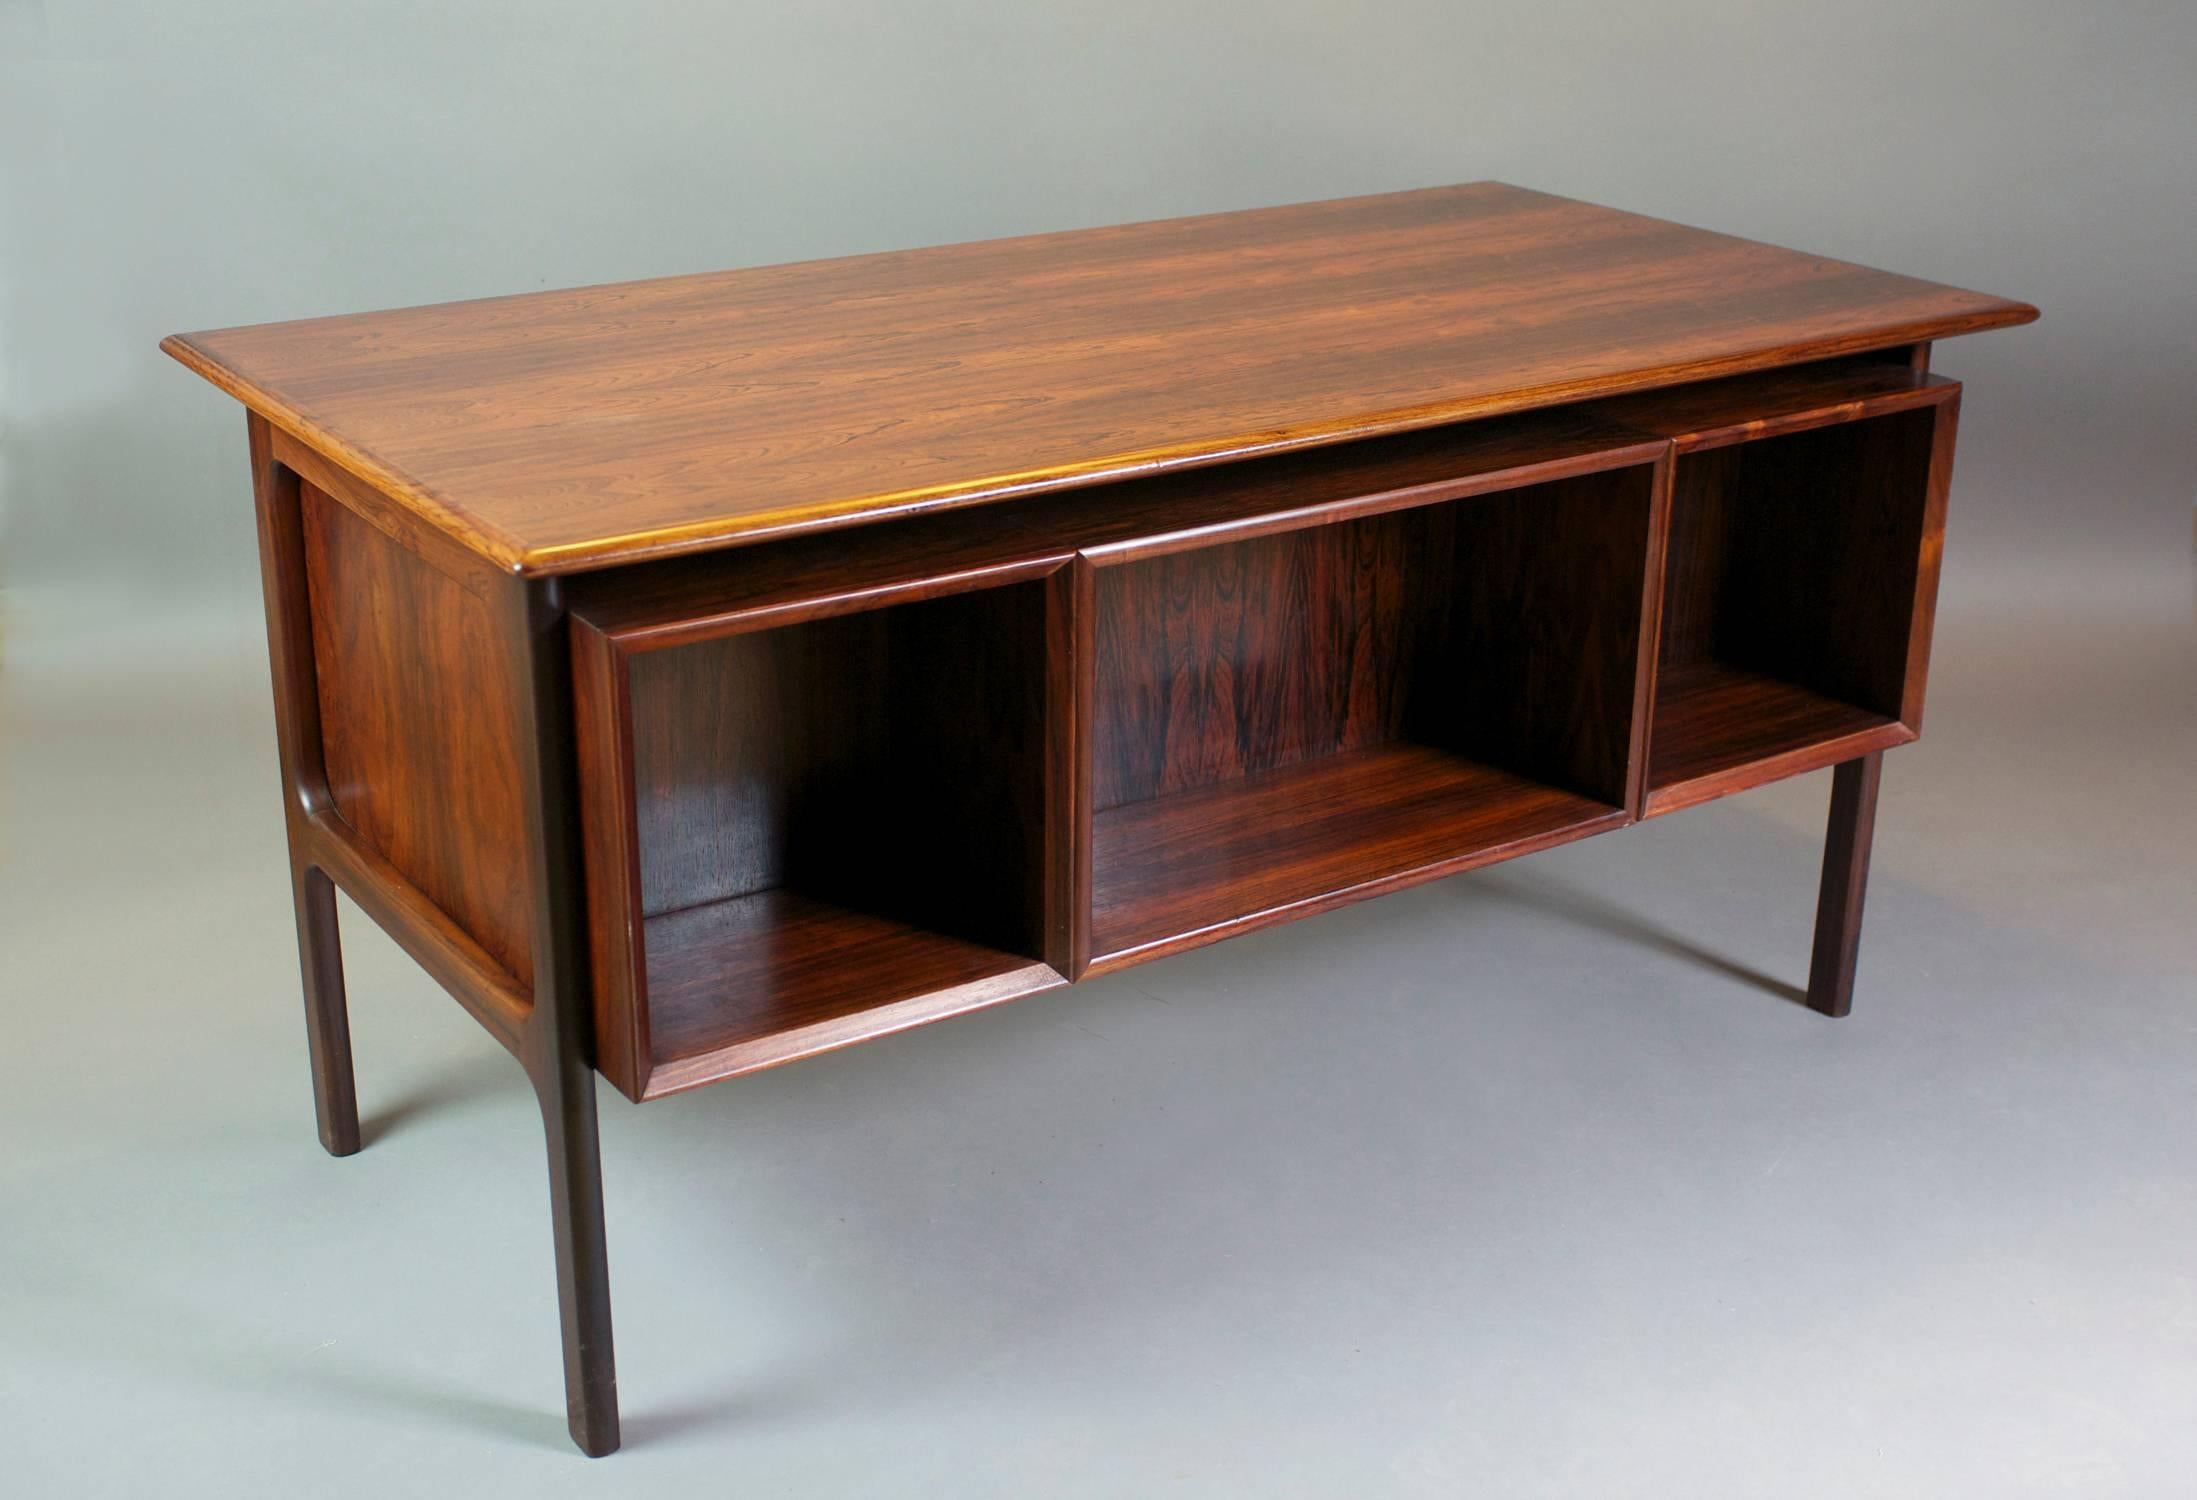 - Six-drawer cabinet in rosewood by Arne Vodder for Sibast, Sweden, 1960.
- Upper drawers are equipped with locks.
- Three-chamber library located on the outside of the desk.
- The edges are beveled and the handles are embedded.